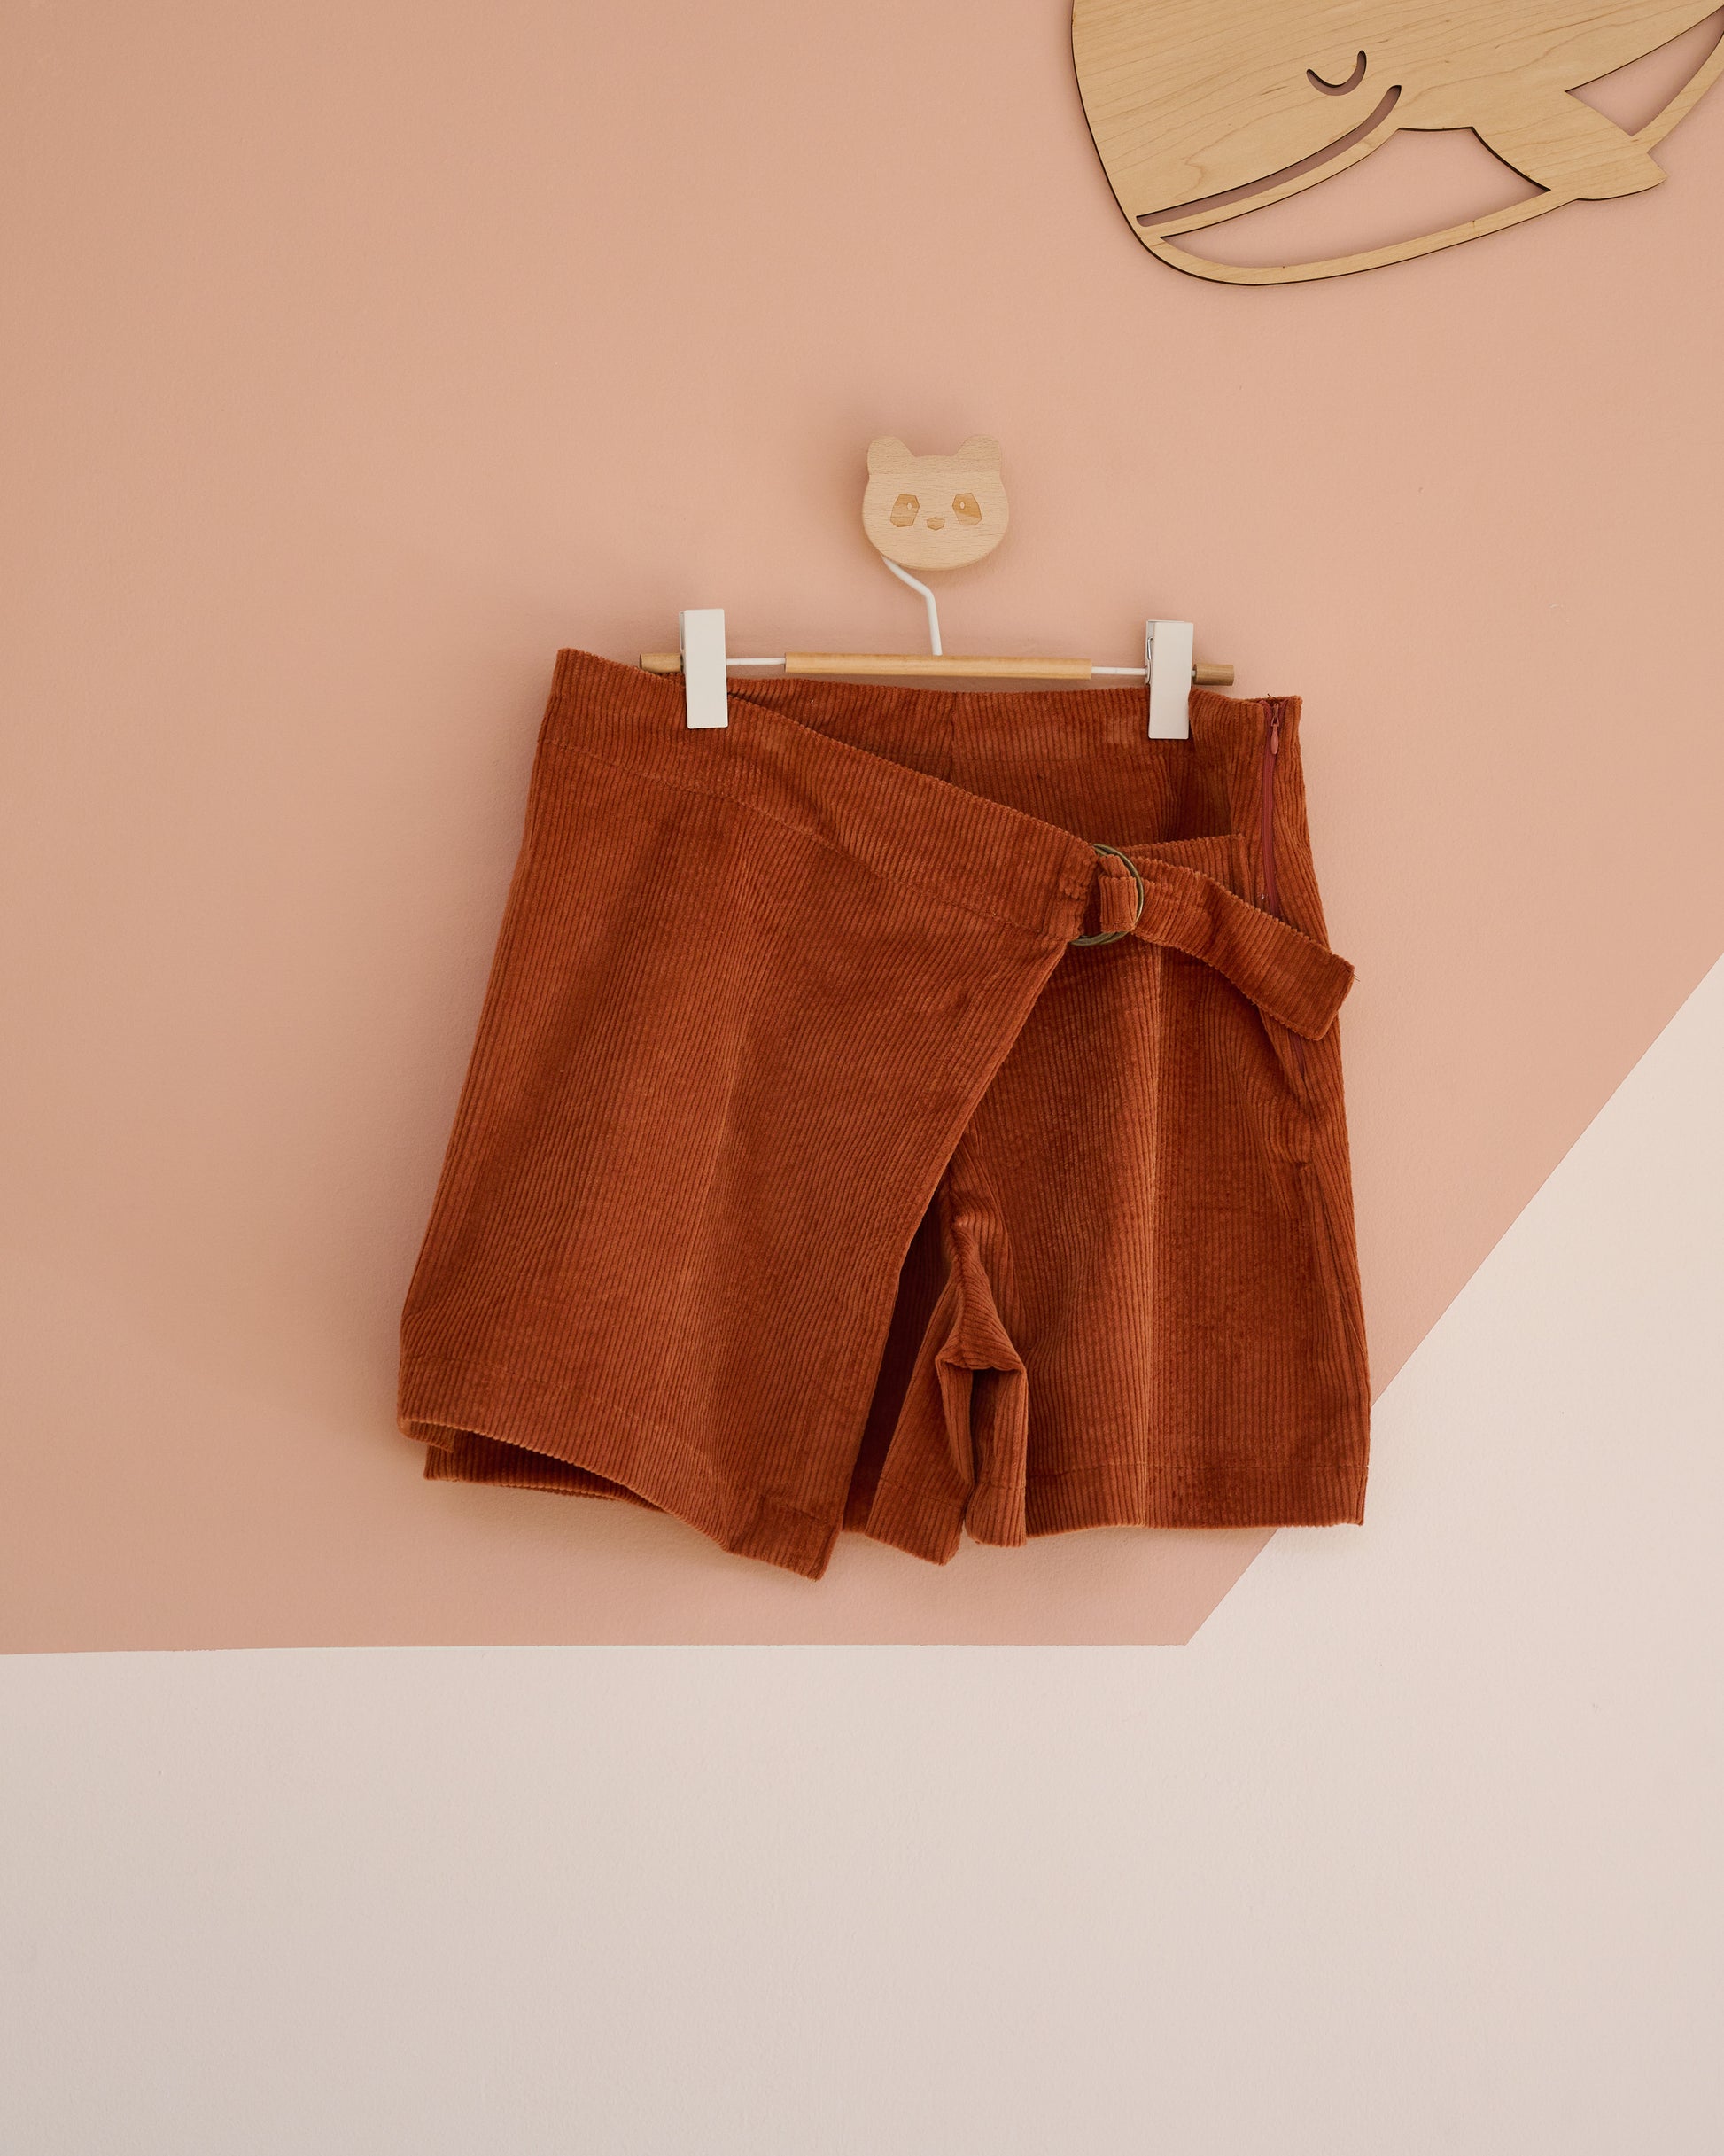 The Magical Wood Dungaree Skirt/Skort - CooCootales